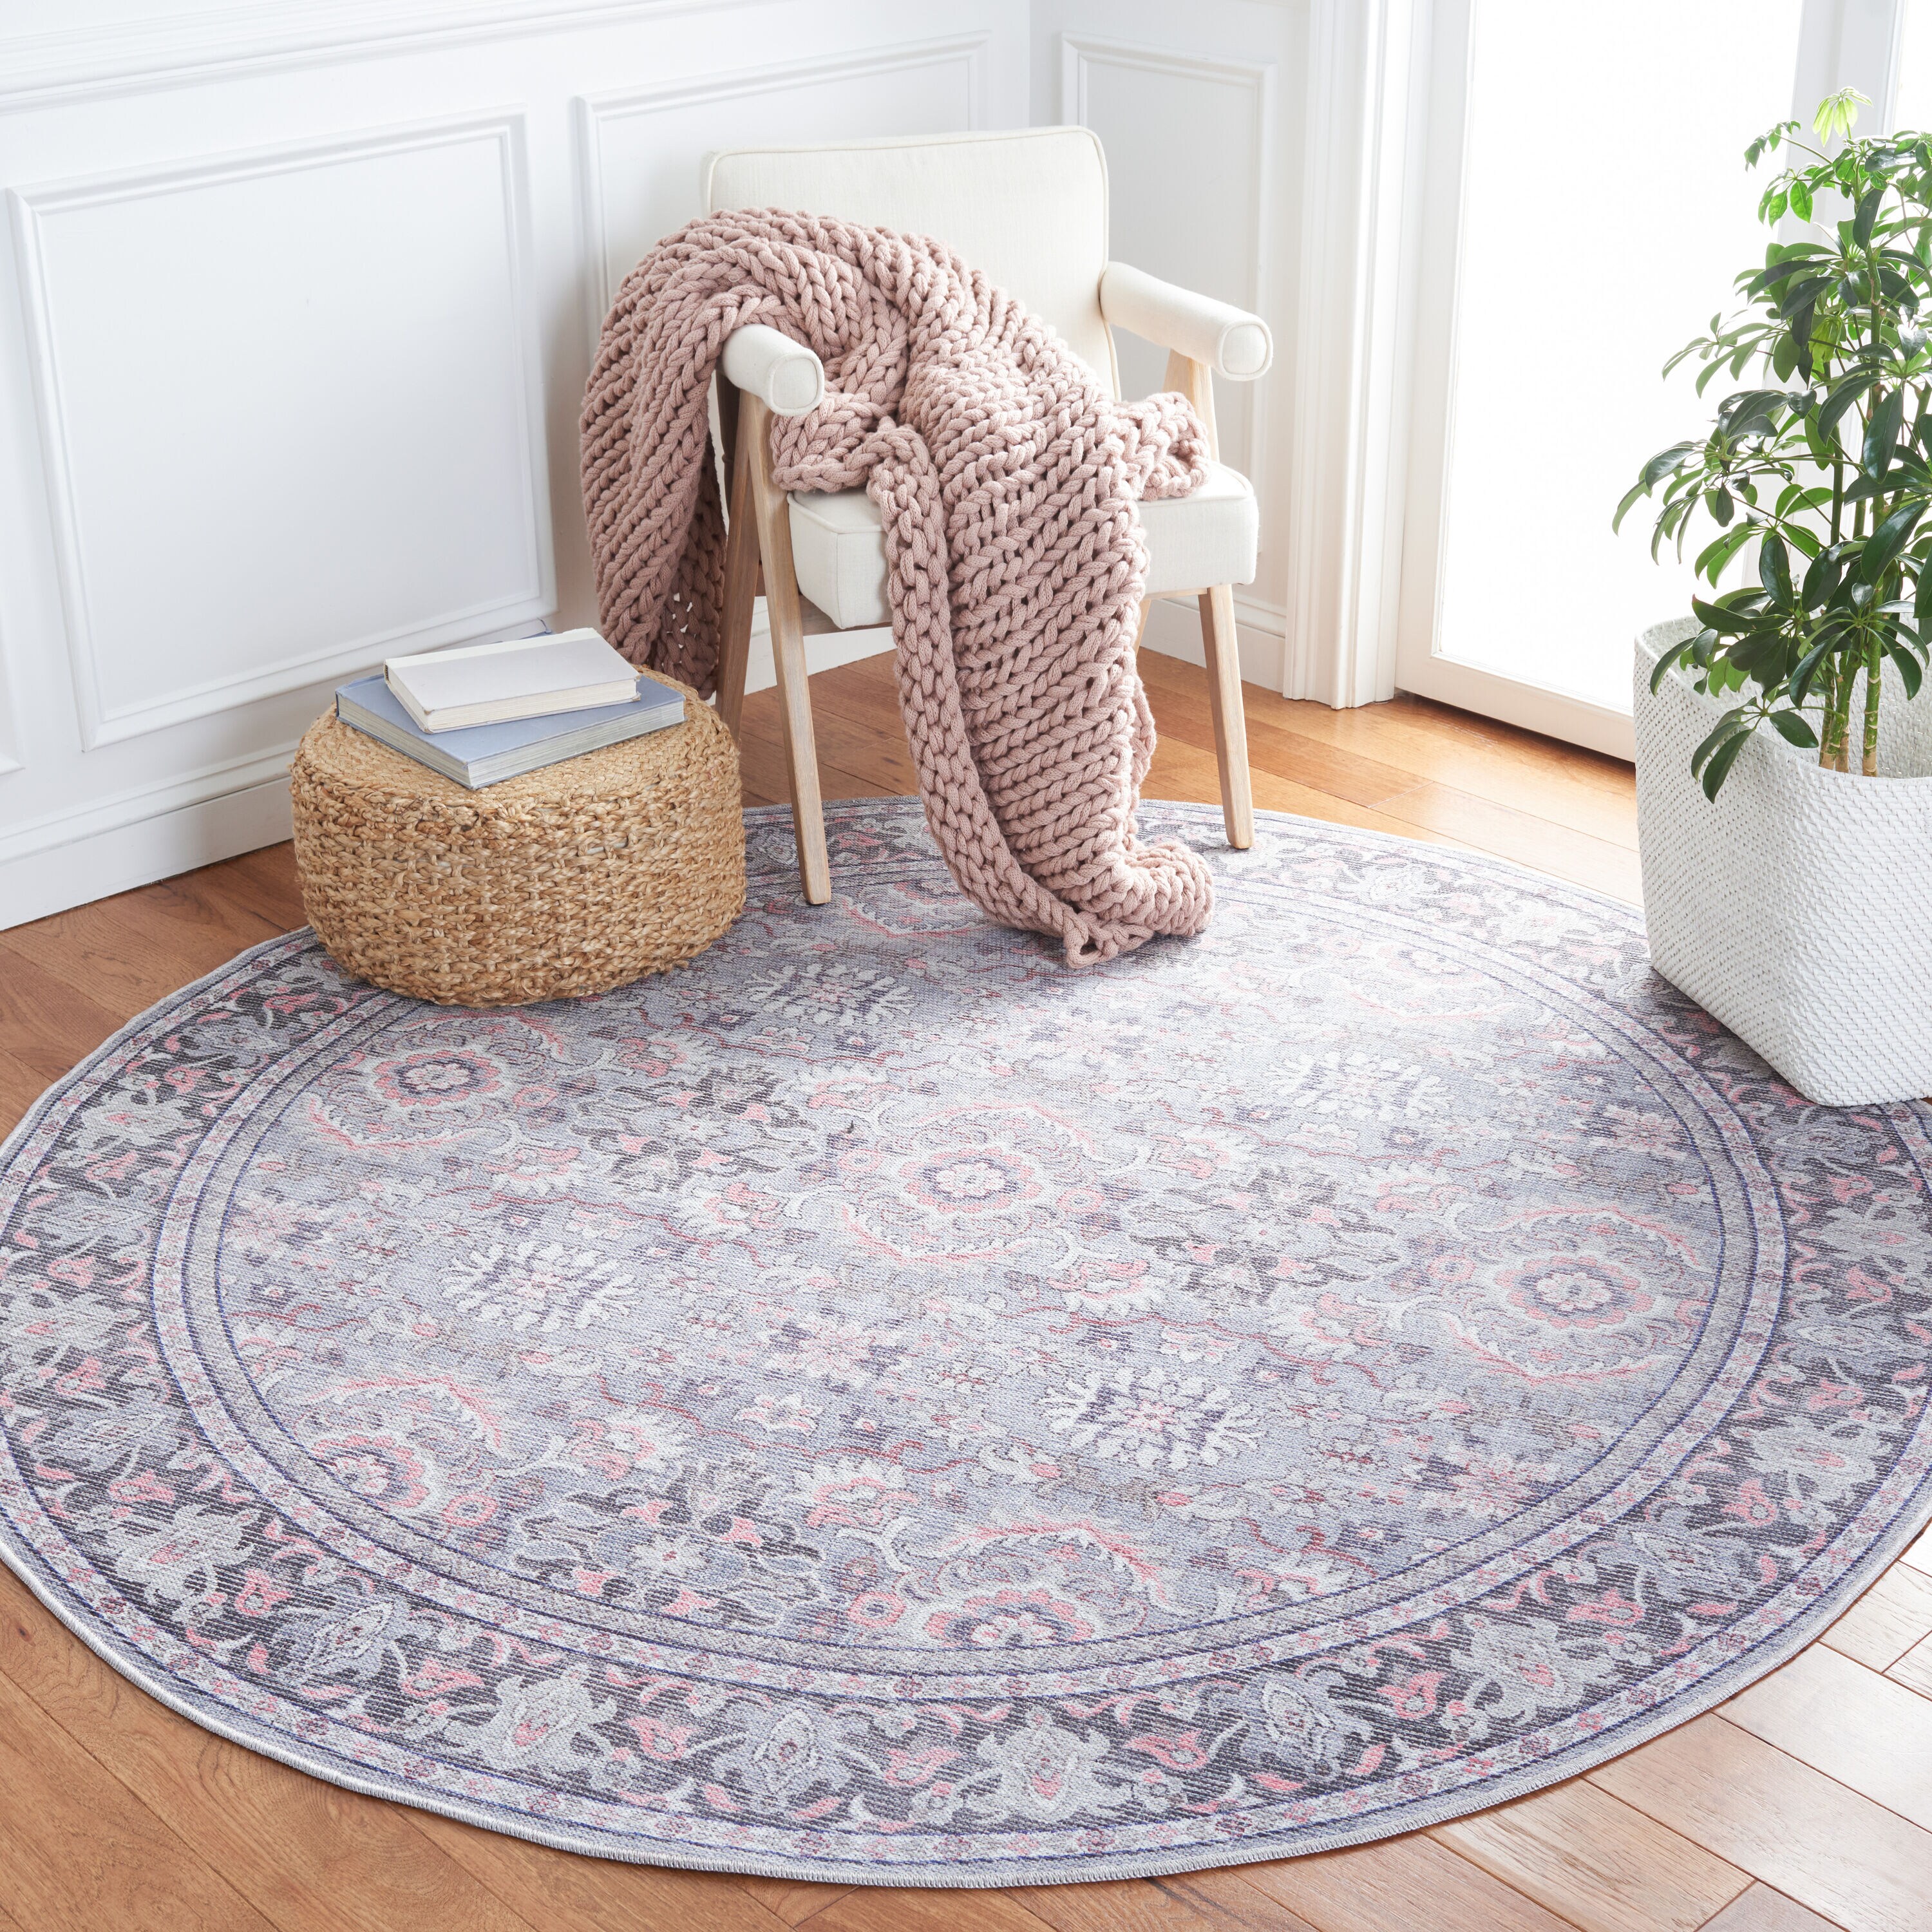 Standard Rug Sizes Guide, Chart & Common Comparisons - Homely Rugs